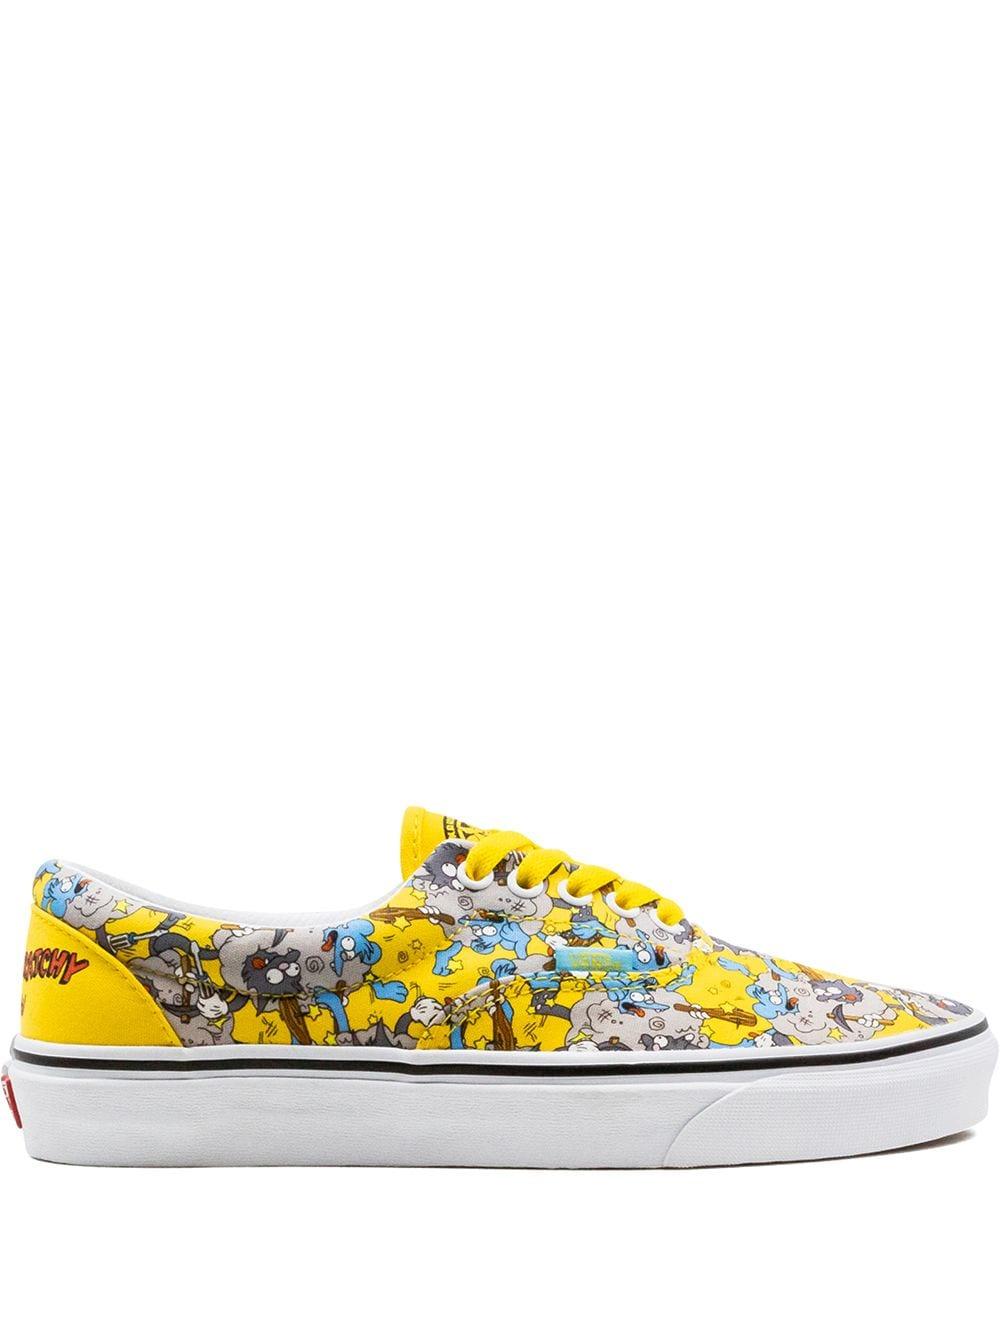 Vans X The Simpsons Itchy & Scratchy Era Sneakers in Yellow for Men | Lyst